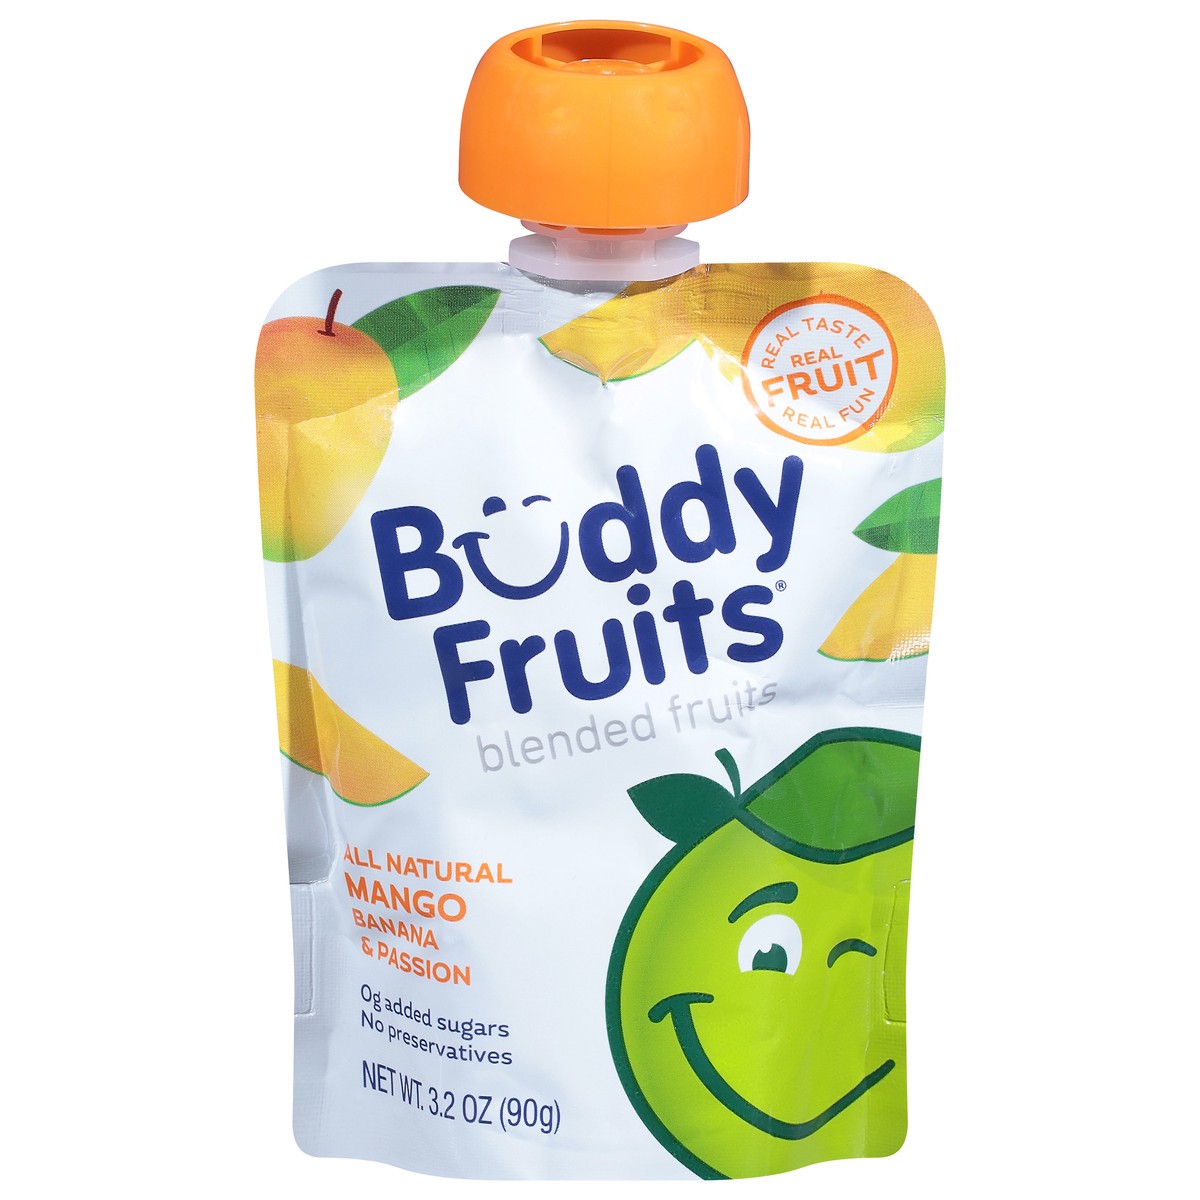 slide 1 of 9, Buddy Fruitss All Natural Mango, Banana & Passion Blended Fruits Pouch, 3.2 oz